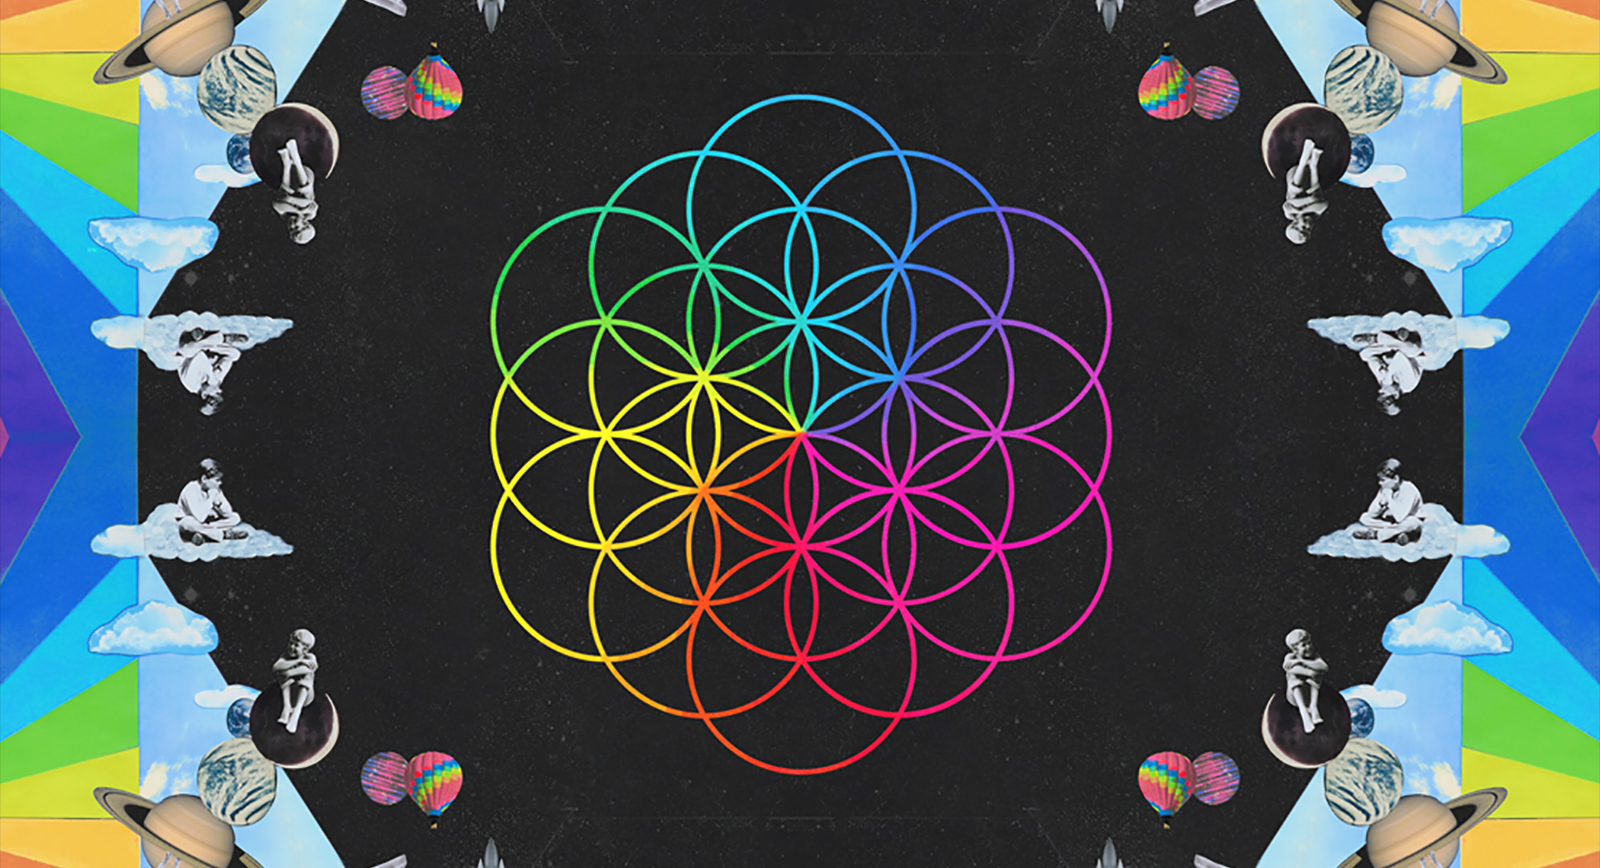 Coldplay-A-Head-Full-of-Dreams-Tour-2016-Concert-Cities-Dates-Tickets-Pre-sale-FI